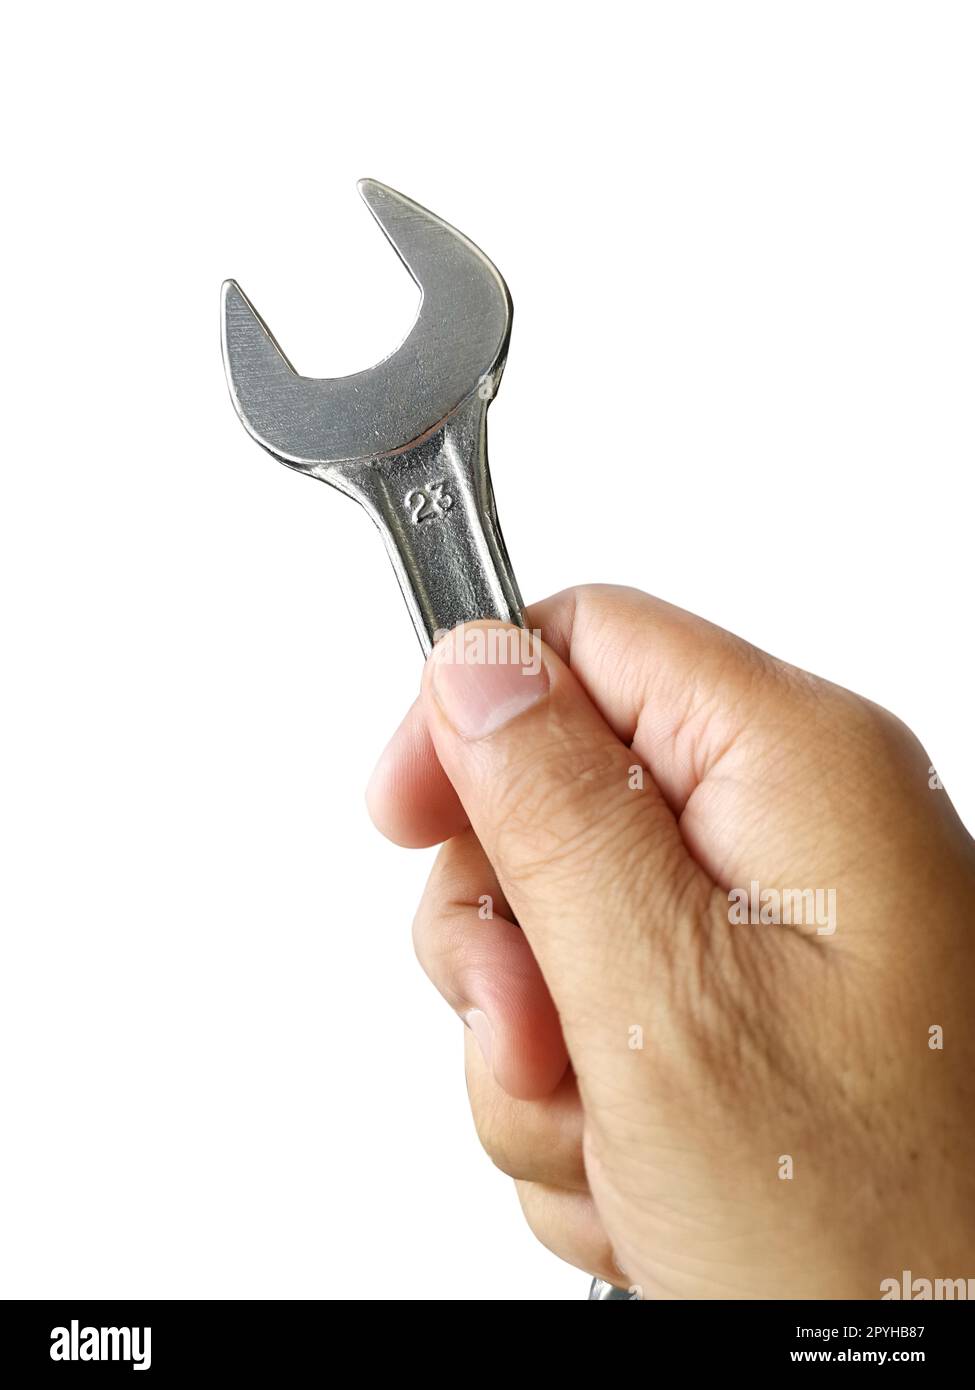 Wrench and hand with white background. Craftsman tool Stock Photo